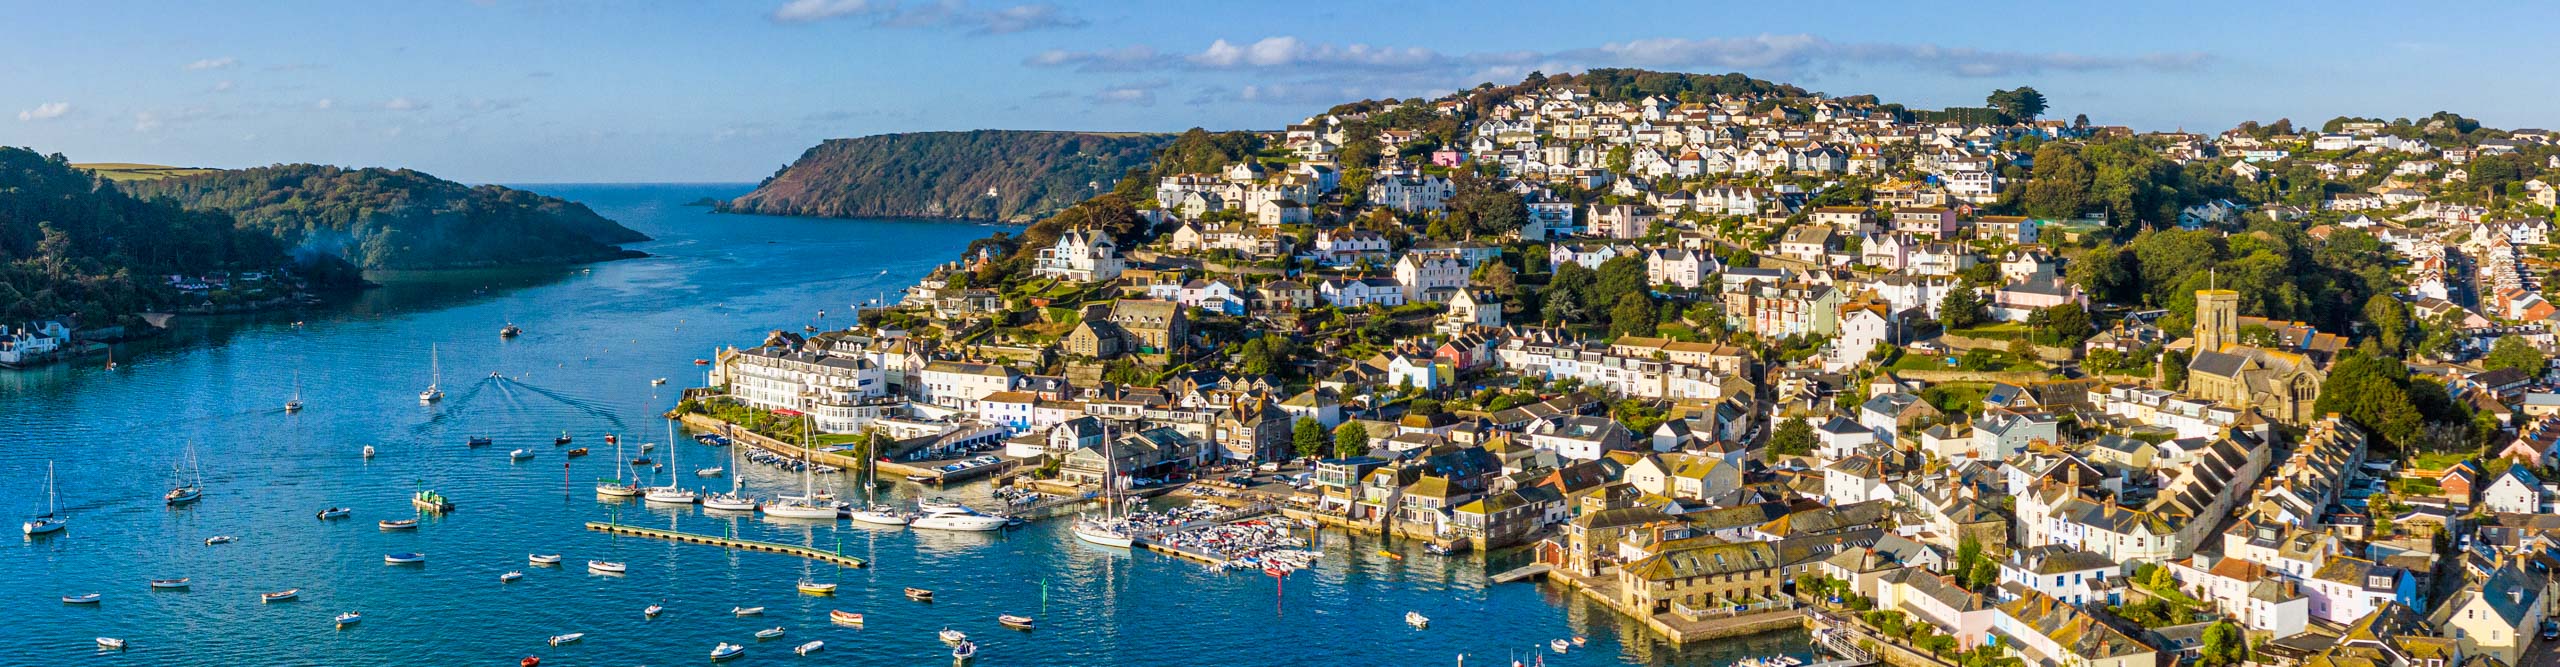 View of harbour of Salcombe on the Kingsbridge Estuary, at sunset on a sunny day, Devon, England